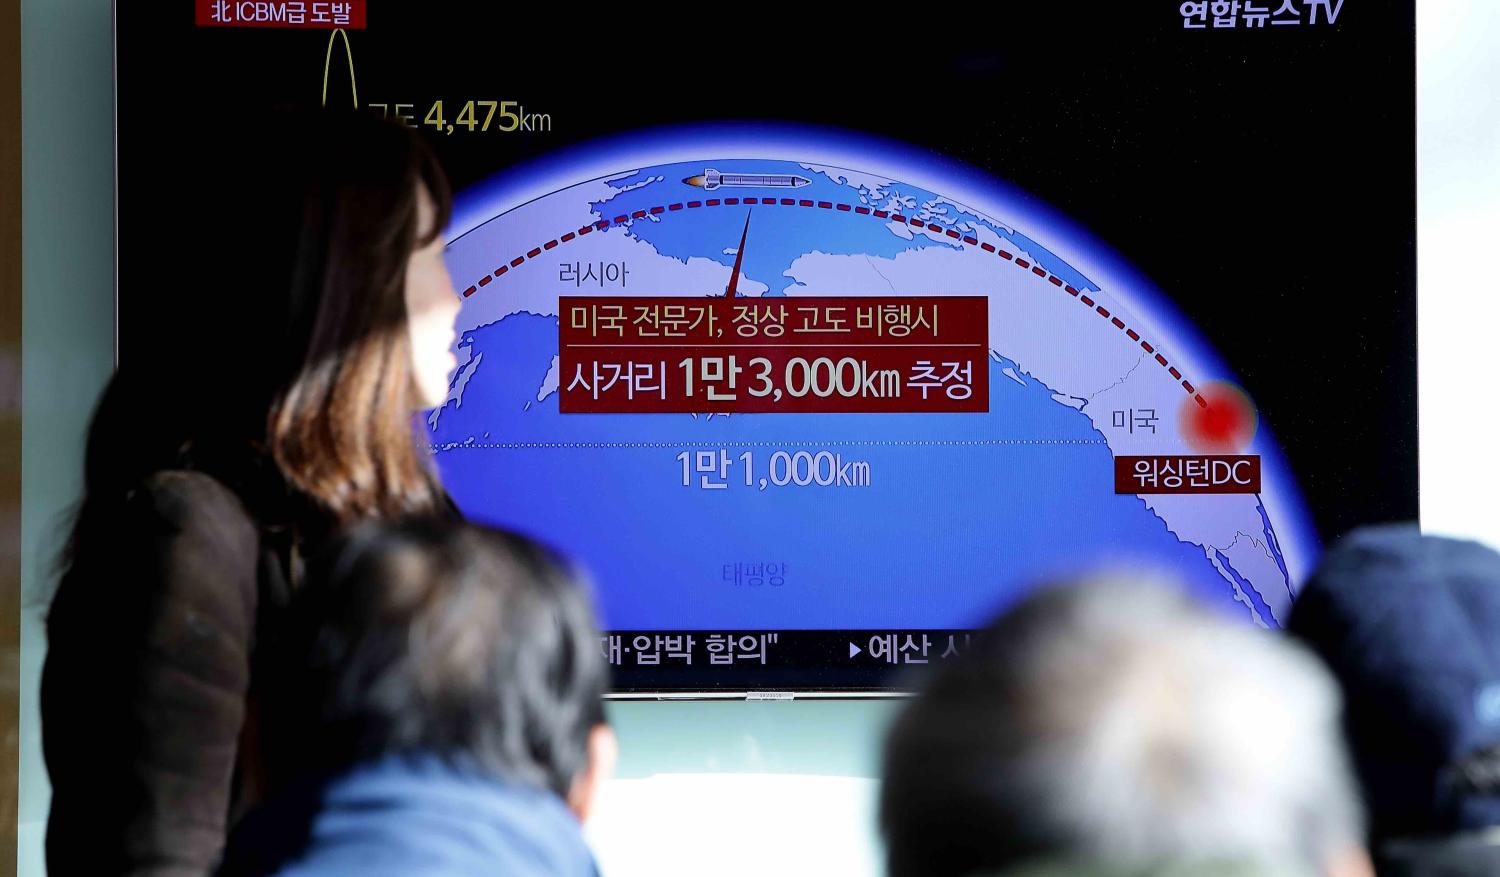 Television reports of North Korea’s test-launch of a ballistic missile in November (Photo by Chung Sung-Jun/Getty)